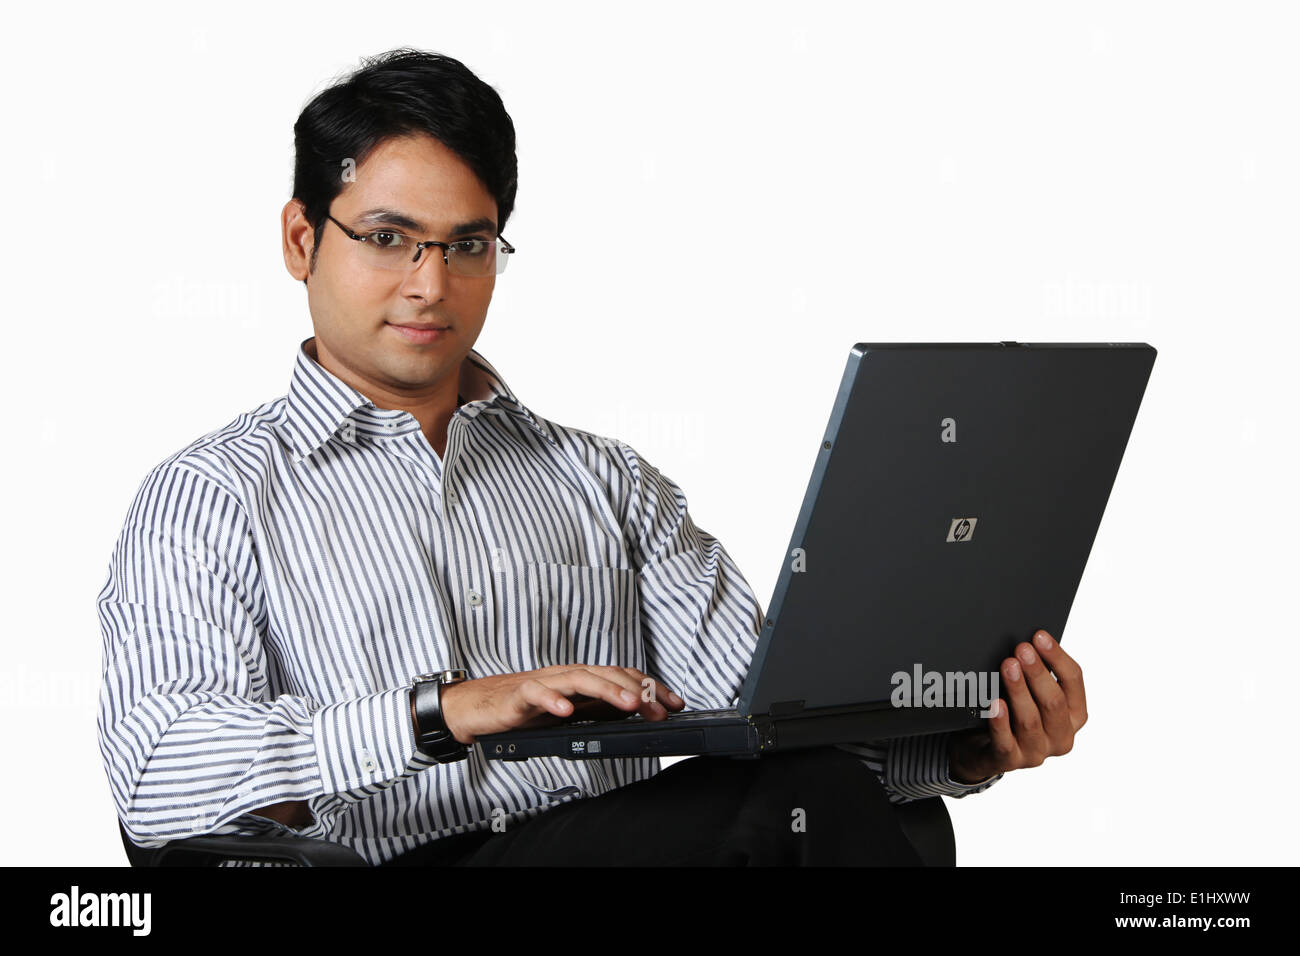 Corporate working on laptop, Pune, Inde Banque D'Images